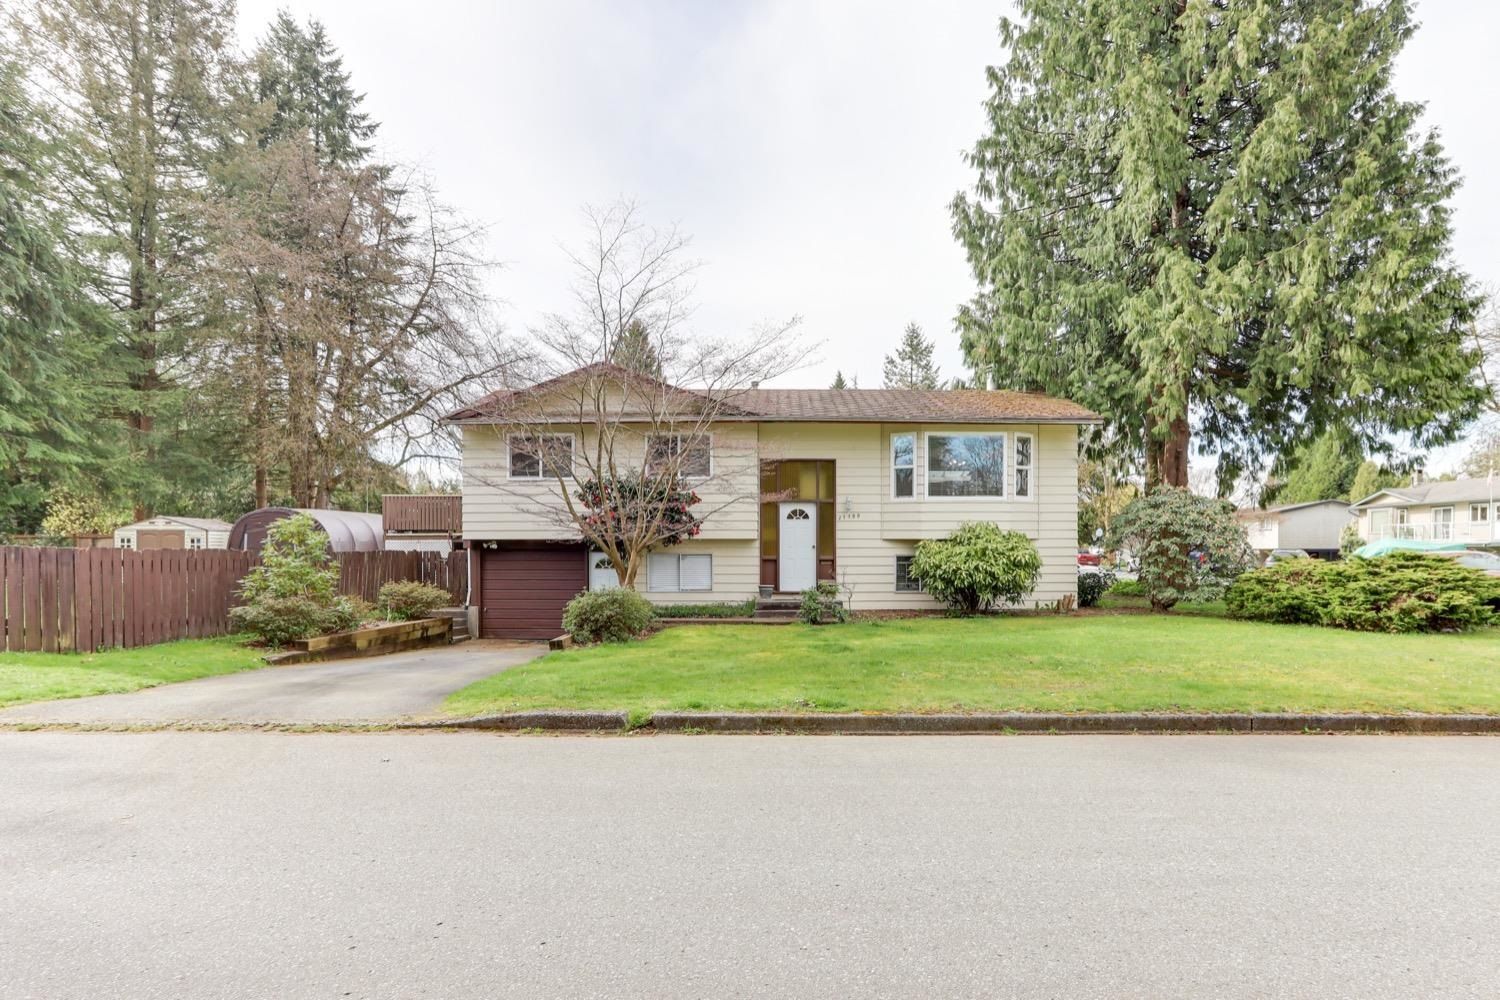 We have just sold a property at 21100 BERRY AVE in Maple Ridge